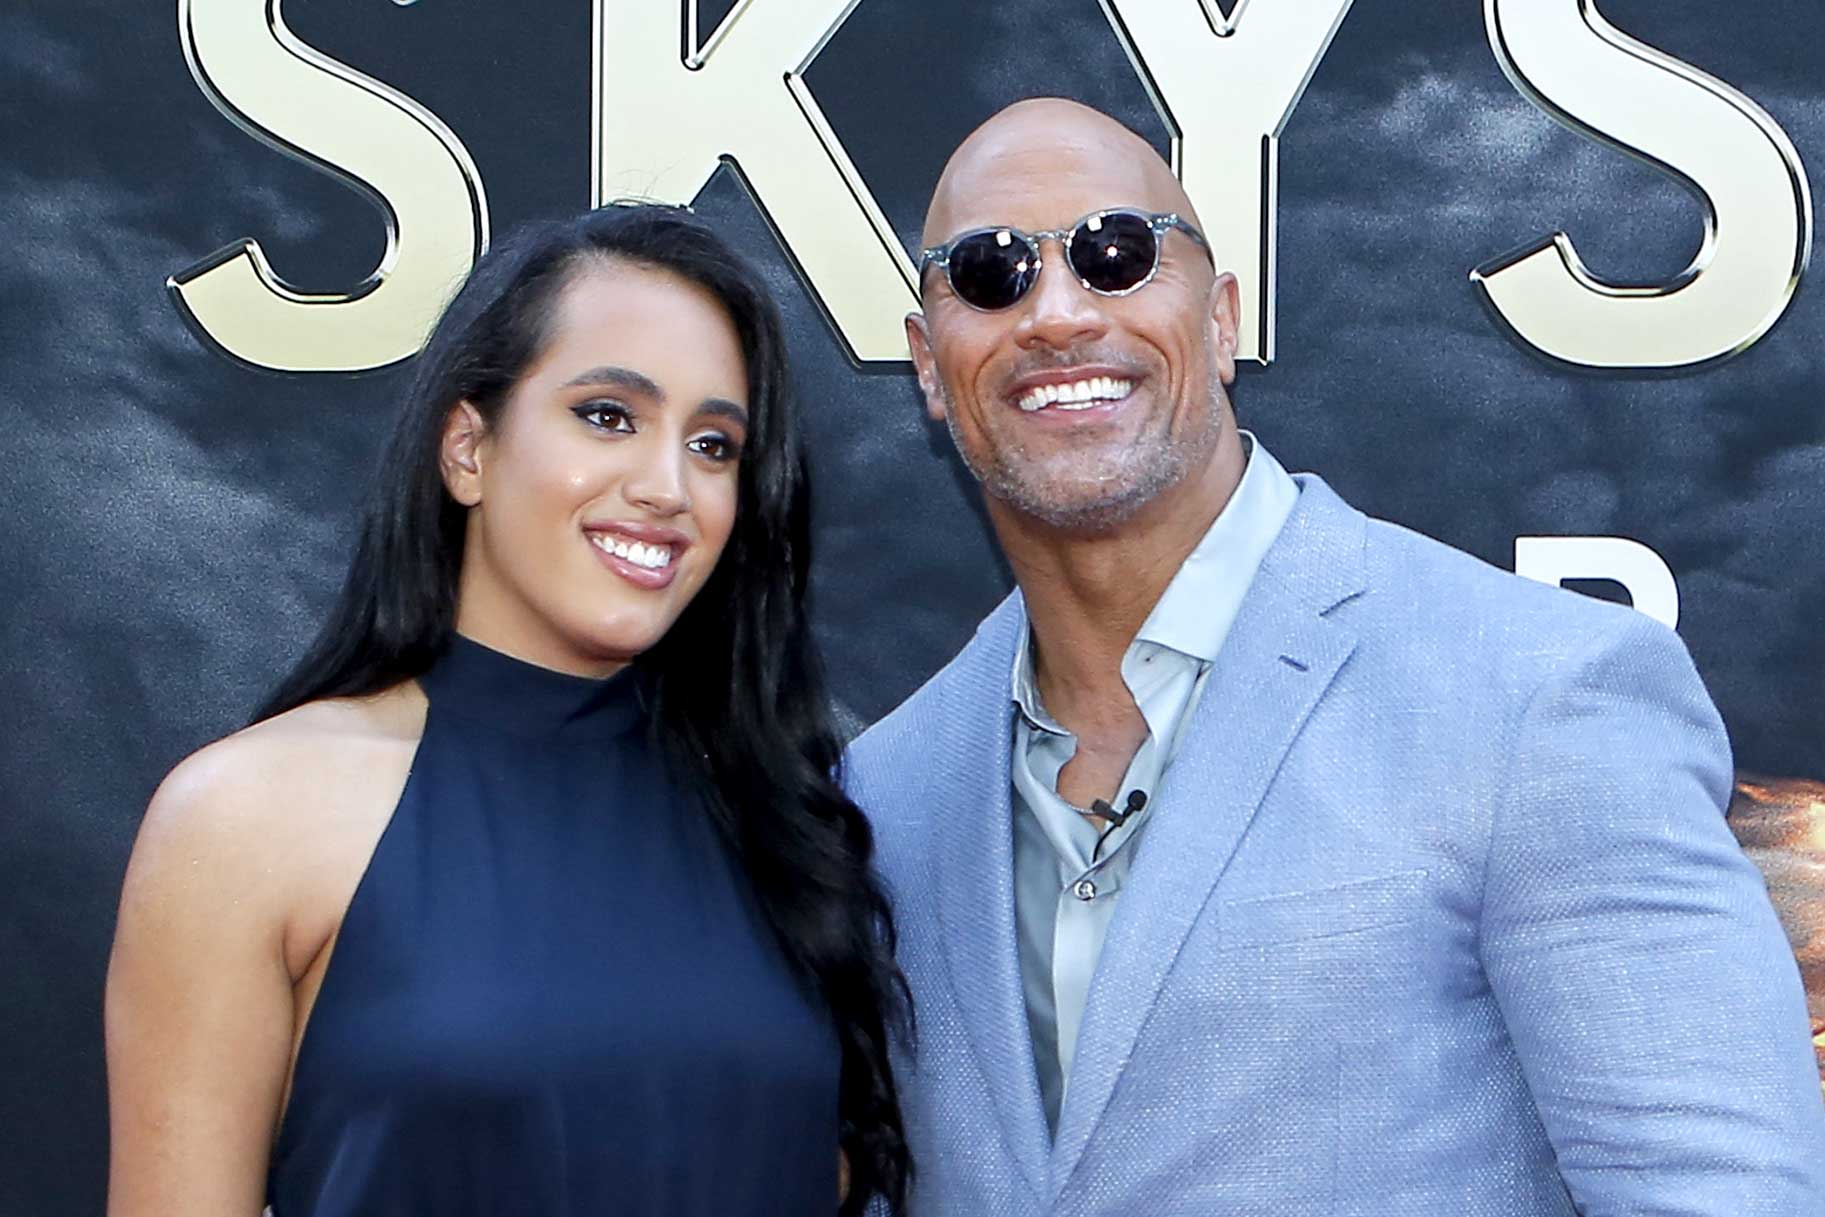 Dwayne Johnson and daughter Simone Alexandra Johnson smile for the cameras at the premiere of Skyscraper